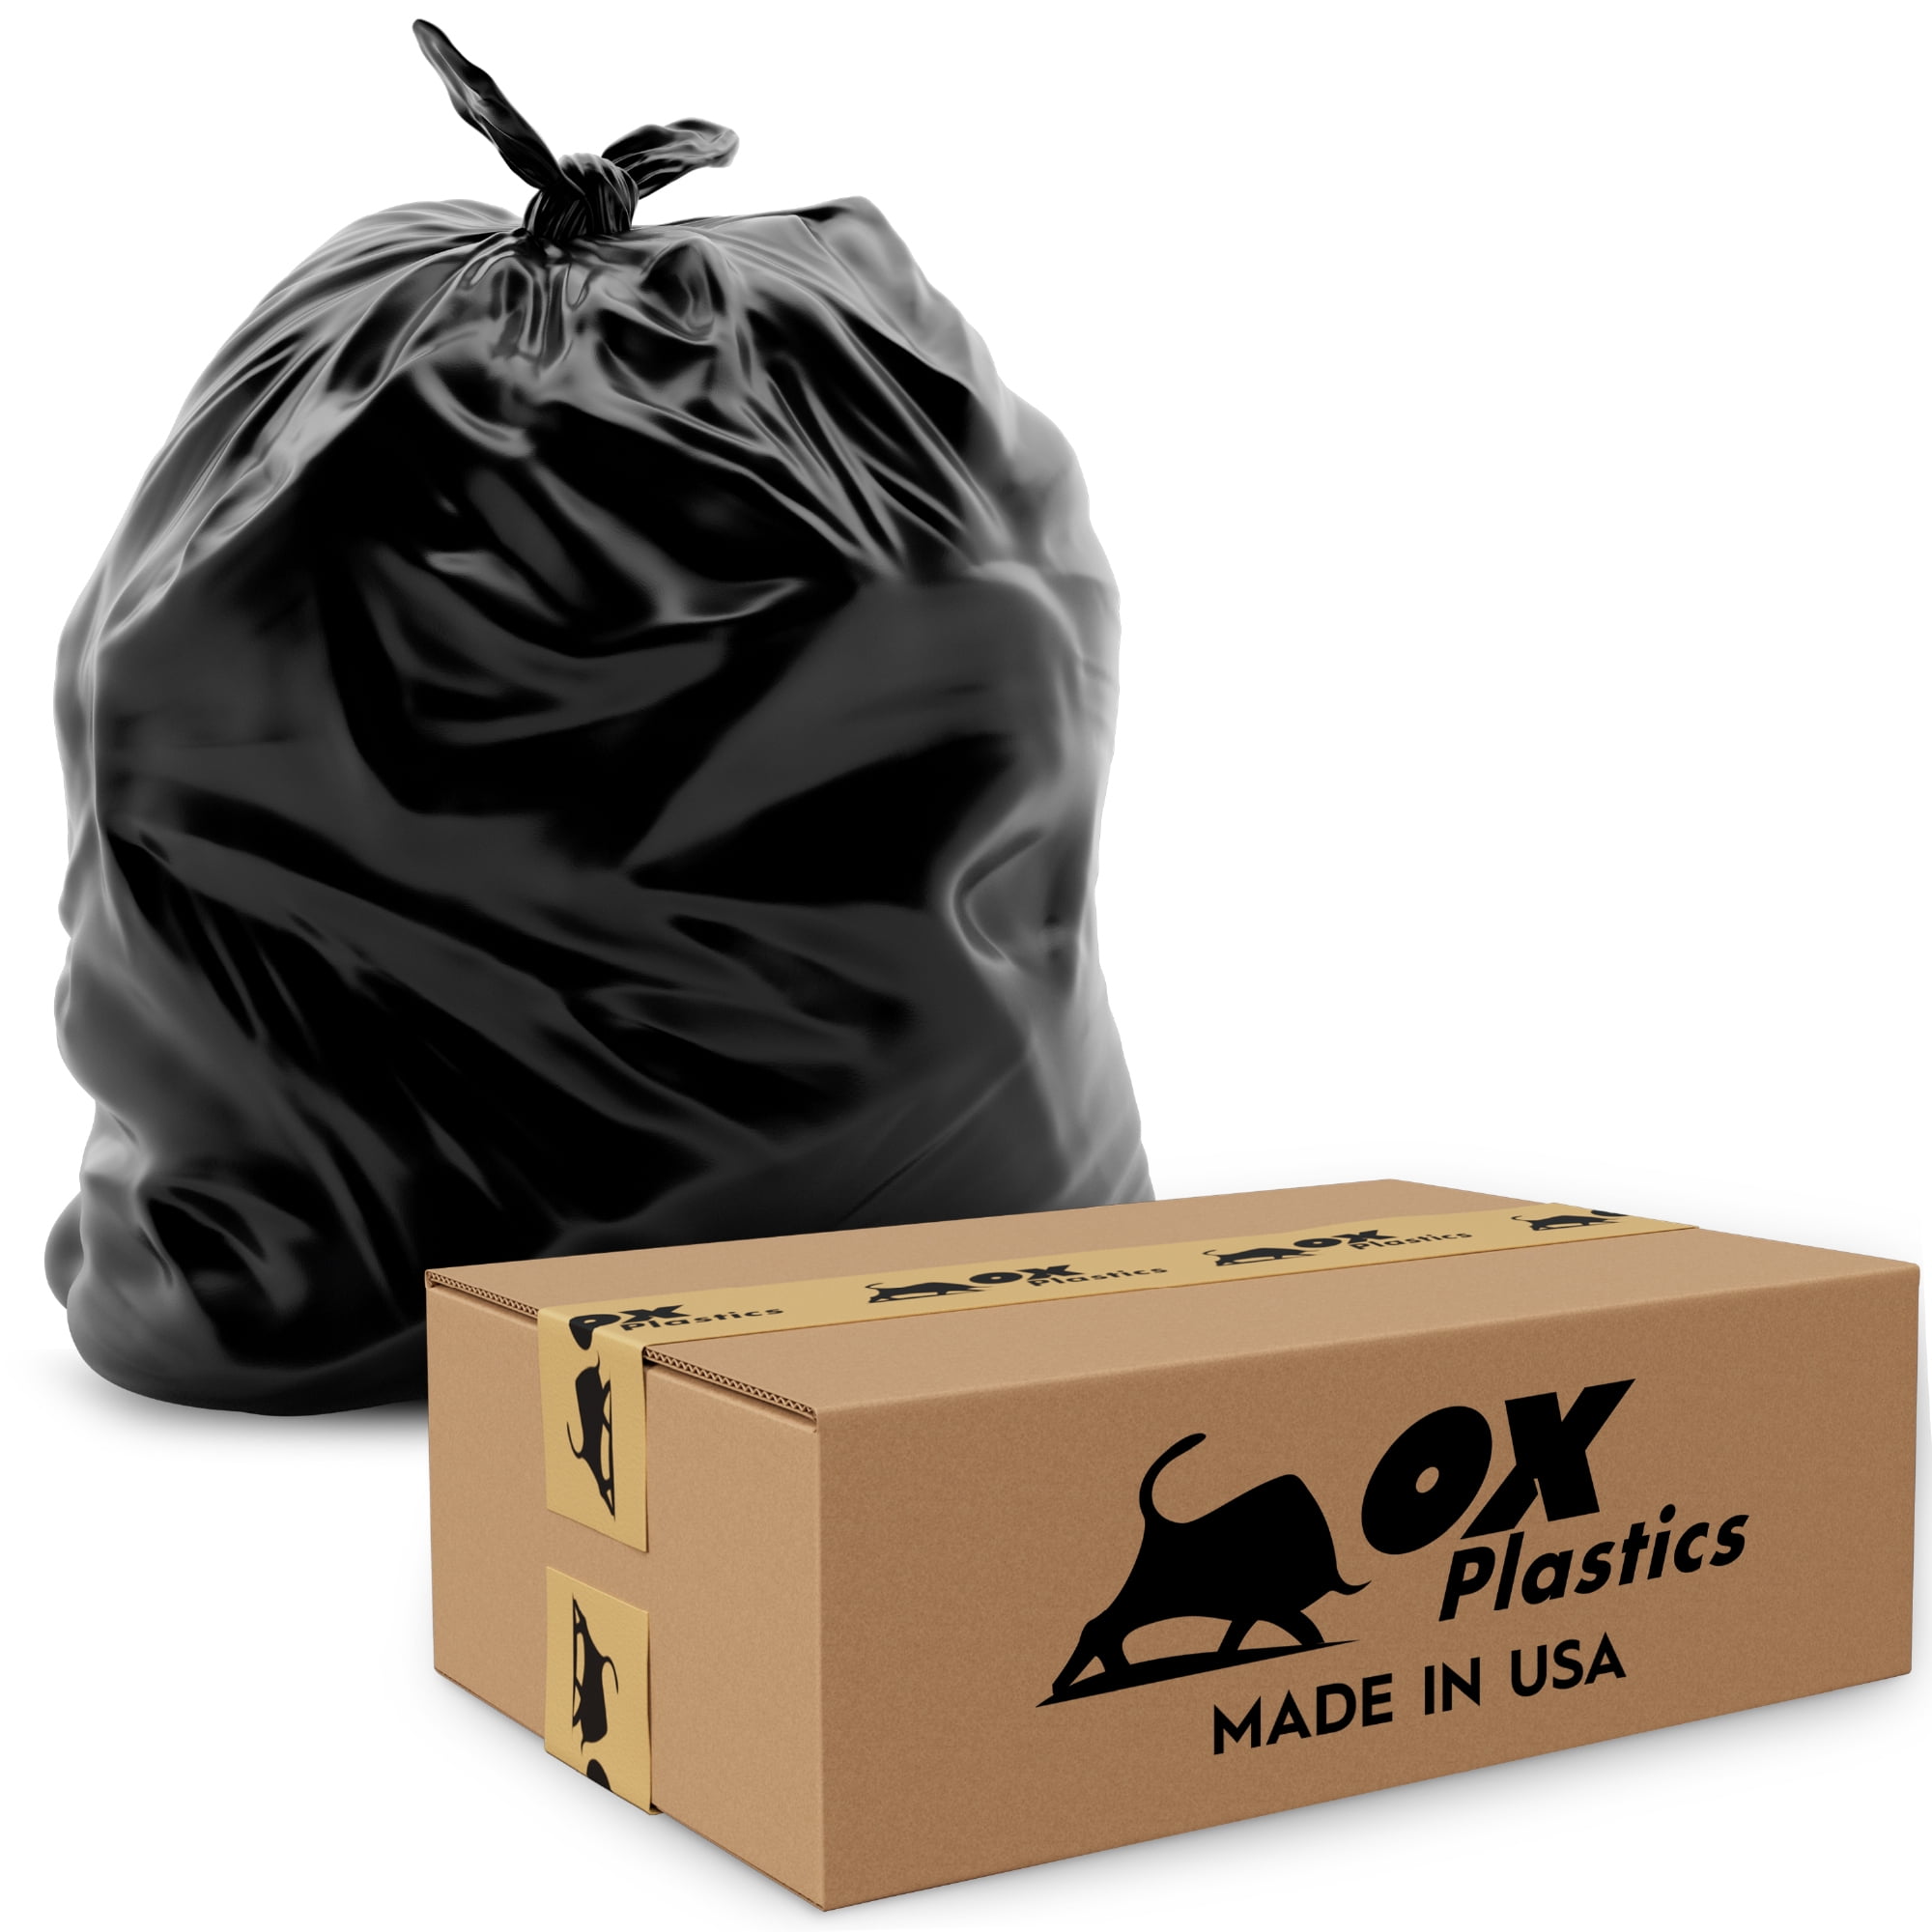 Charmount 55 Gallon Contractor Trash Bags Heavy Duty 3 Mil, 30 Count W/Ties  37x56, Extra Large Garbage Bags for Industrial Commercial Outdoor Yard